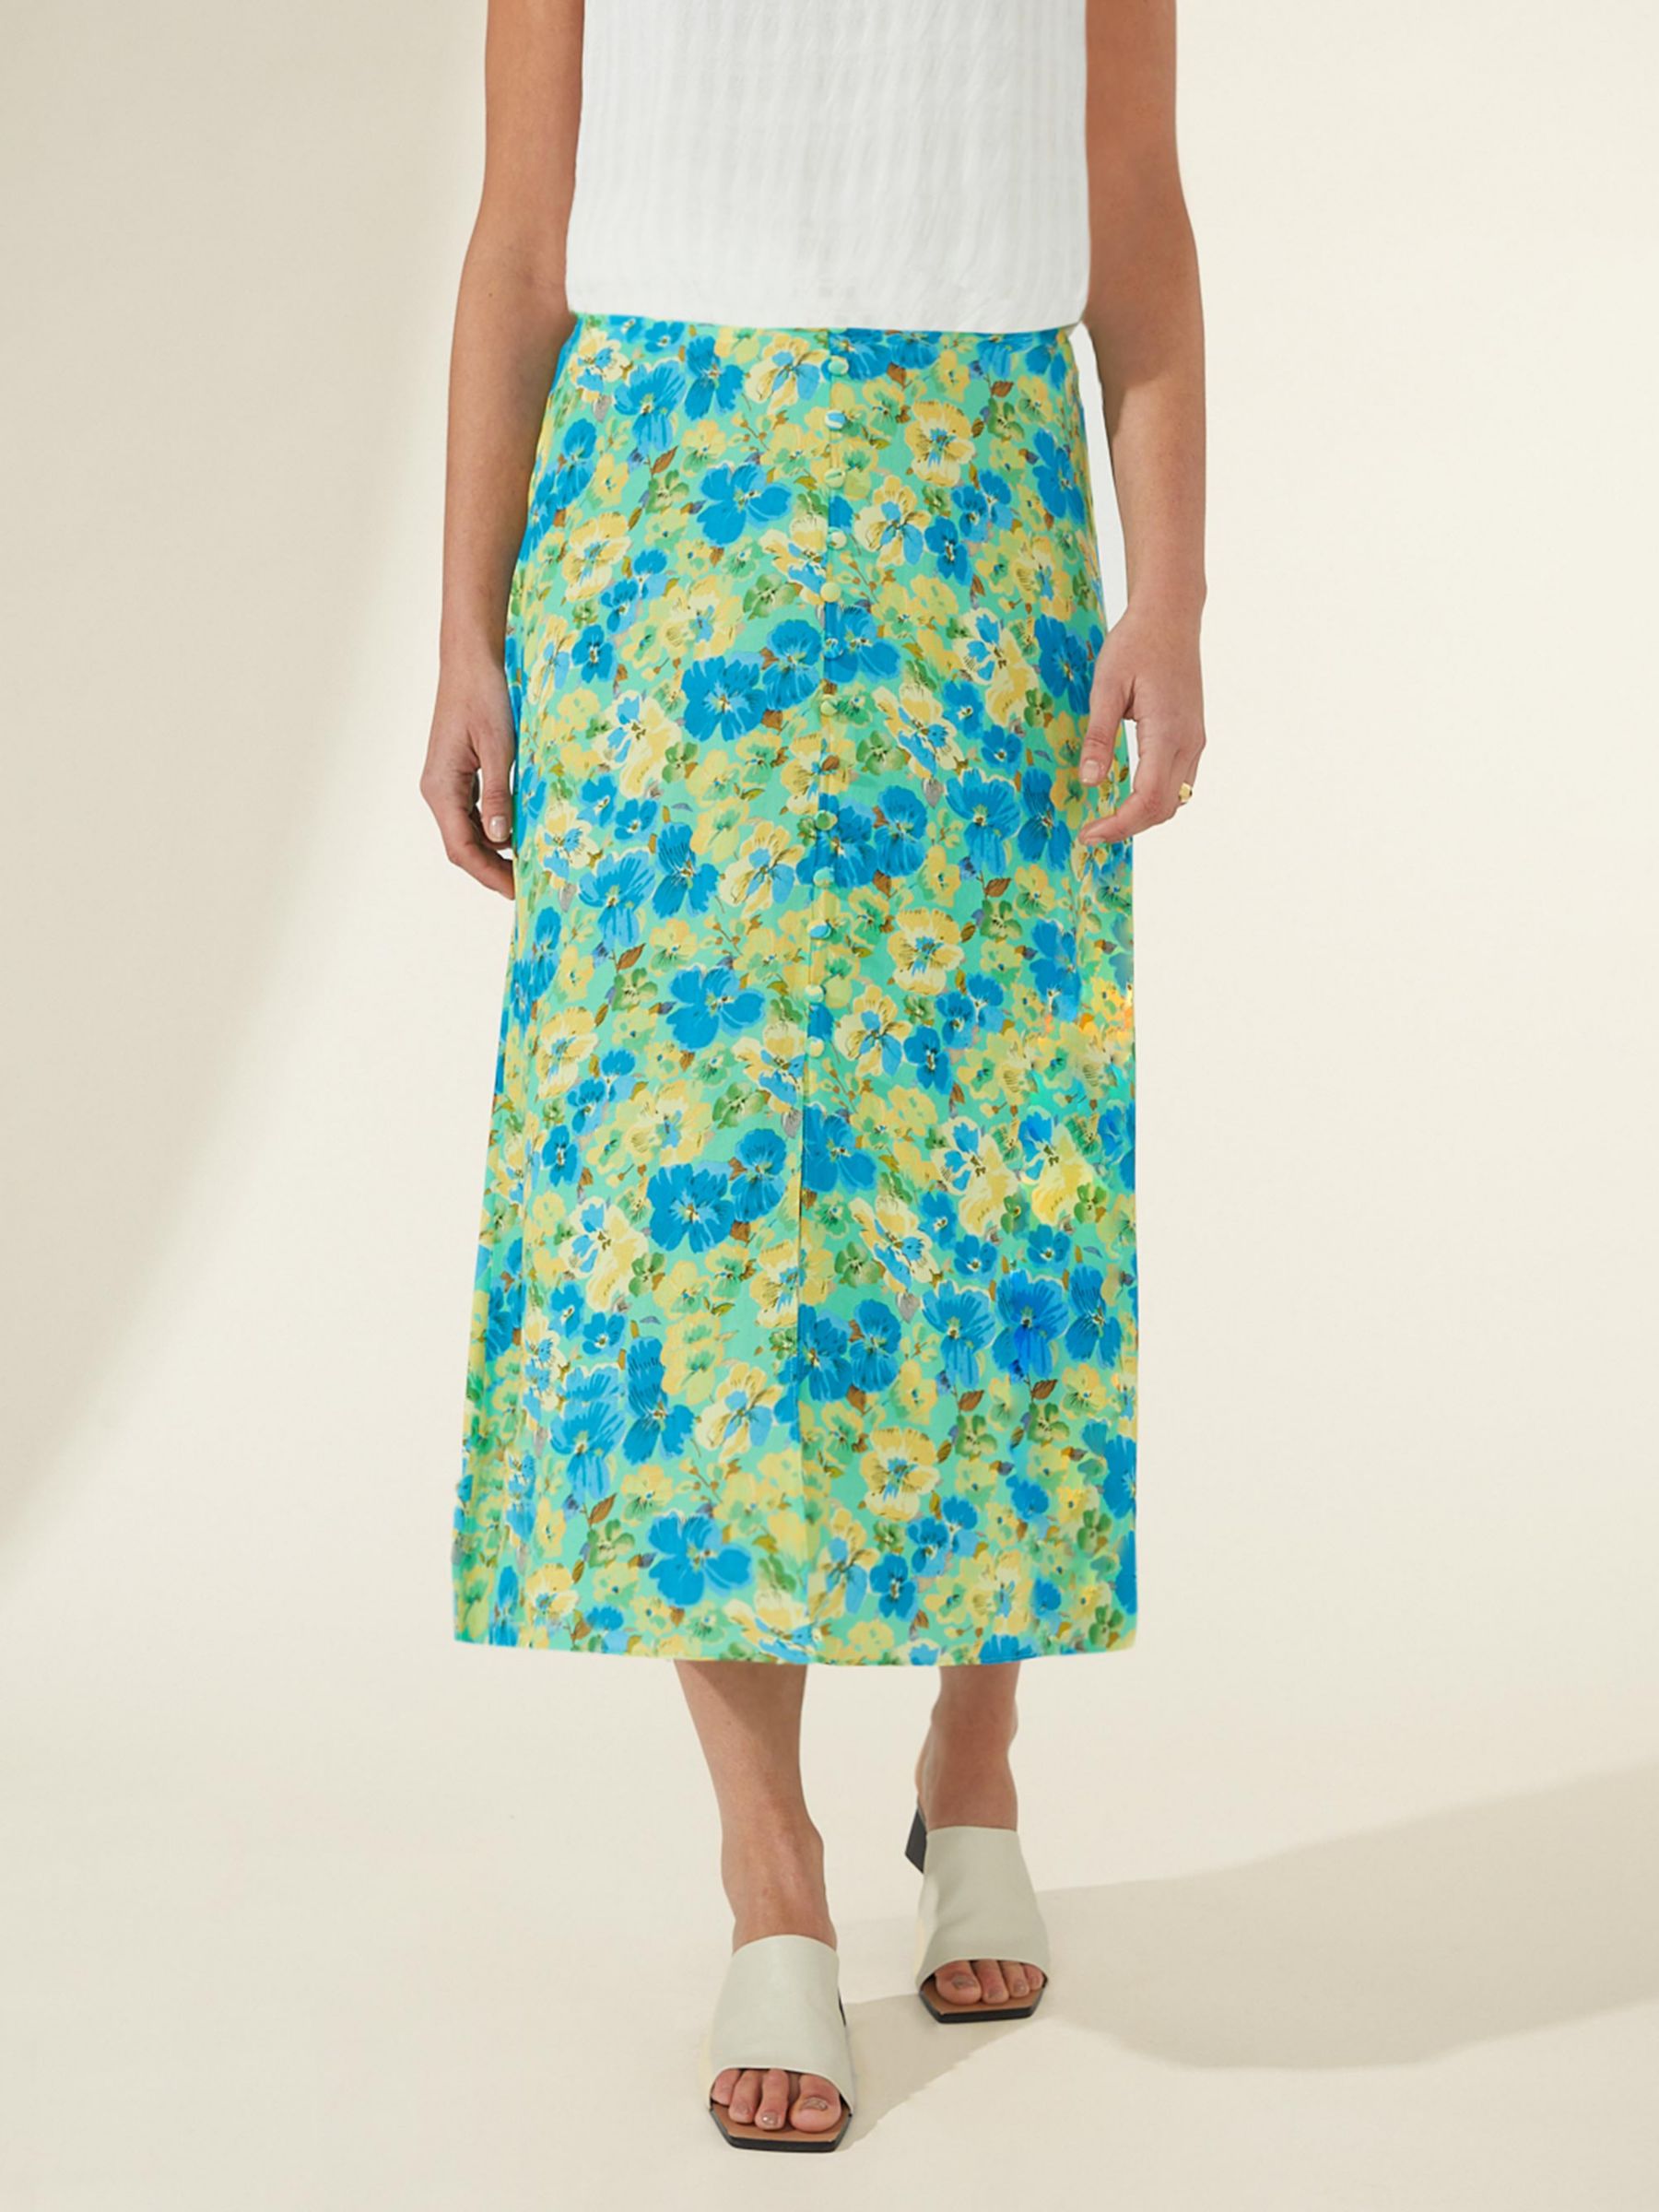 Ro&Zo Floral Print Button Skirt, Blue at John Lewis & Partners